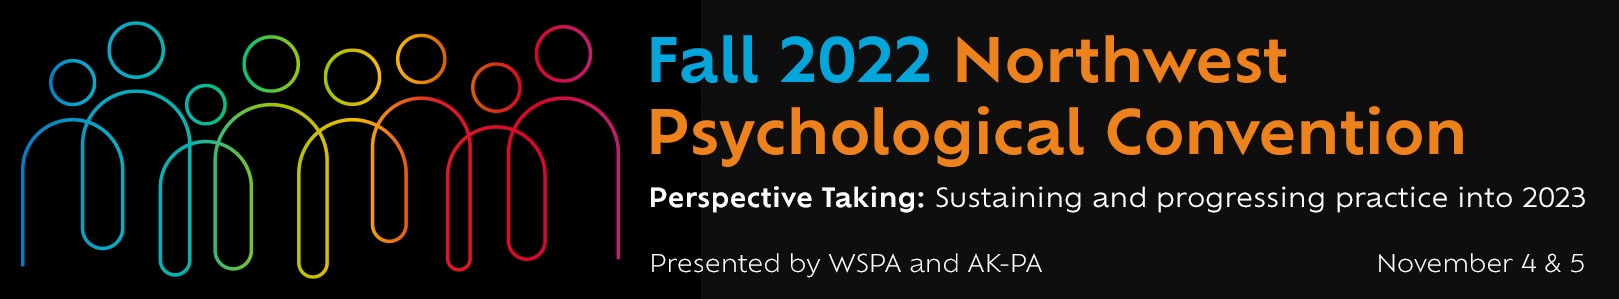 Join us at the Fall 2022 Northwest Psychological Convention